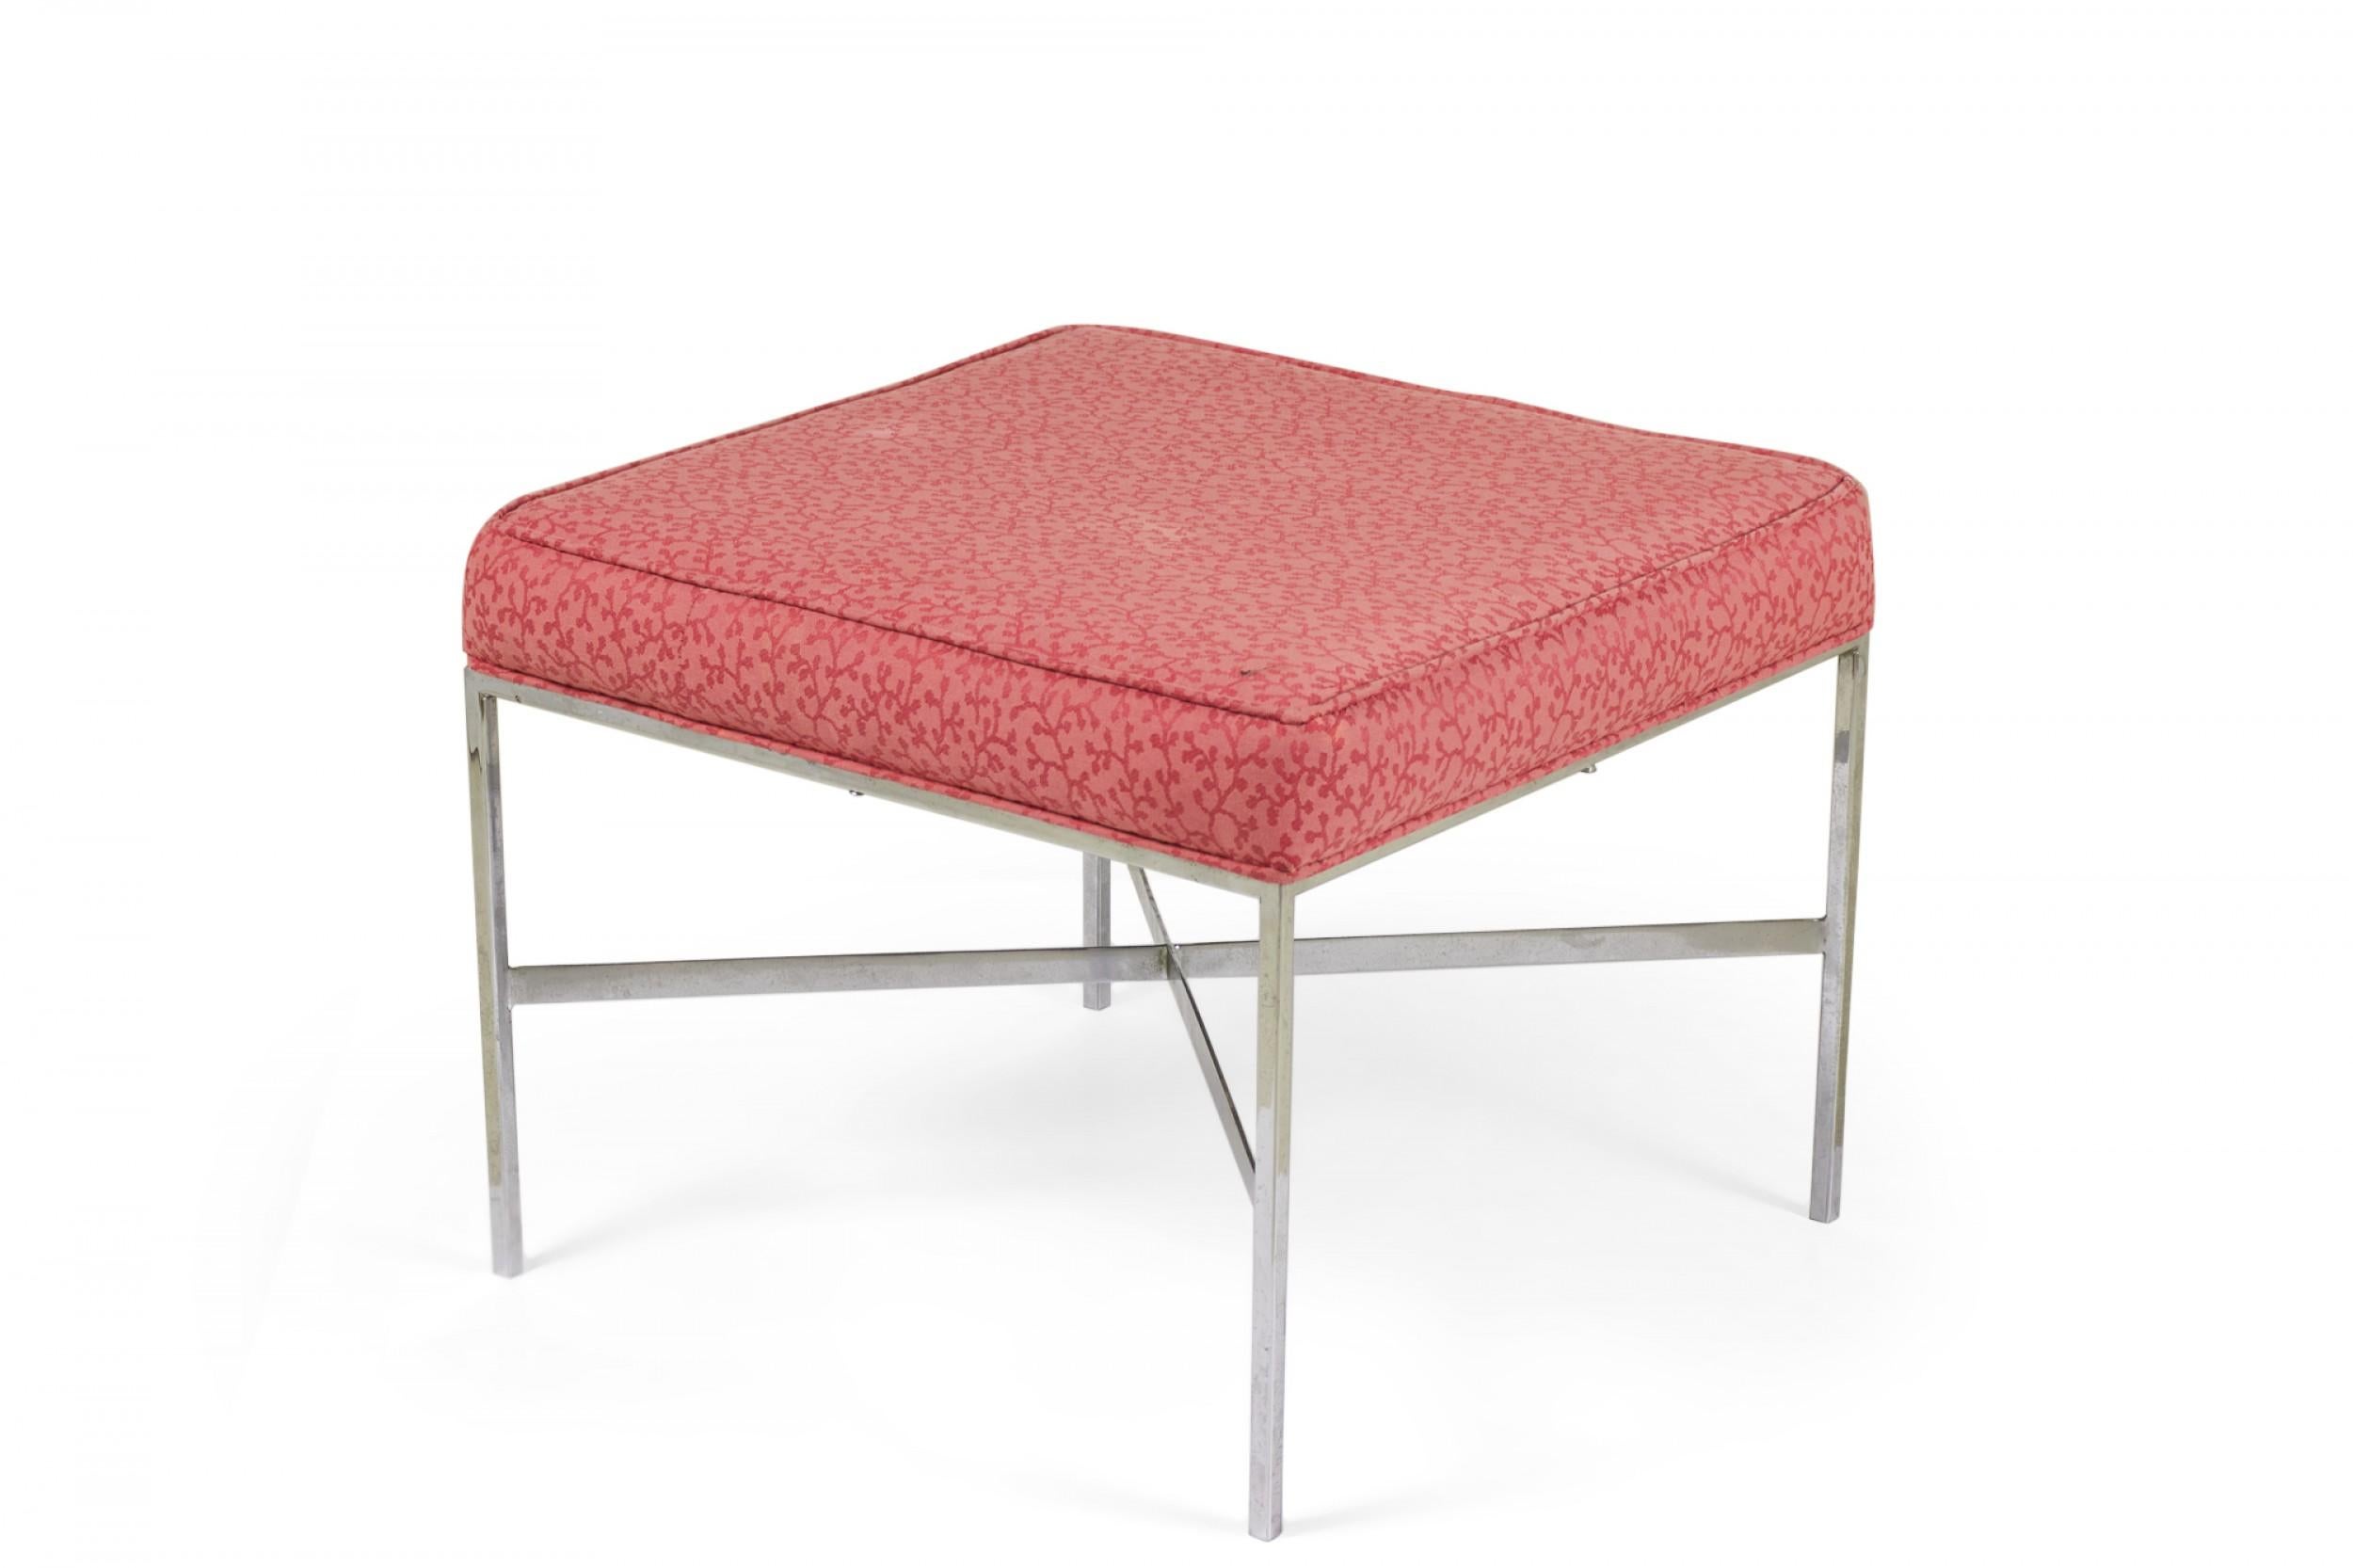 20th Century Design Institute of Chrome and Raspberry Upholstery Square Bench For Sale